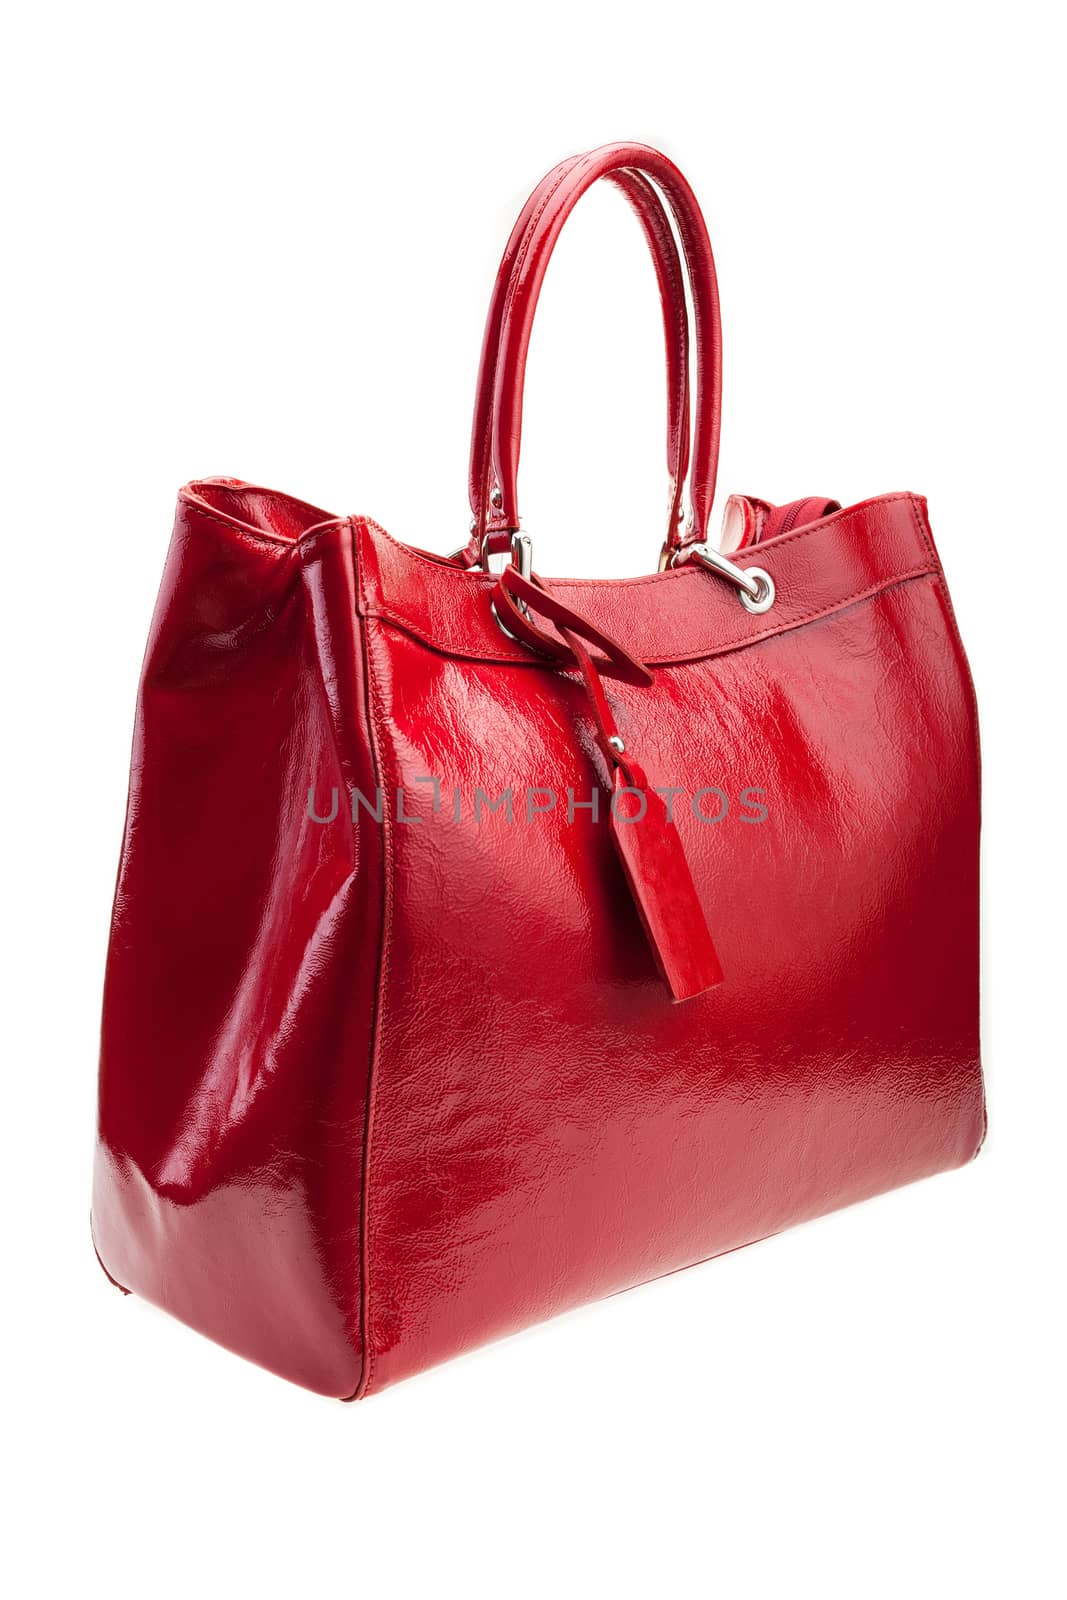 Red womens bag isolated on white background. by igor_stramyk